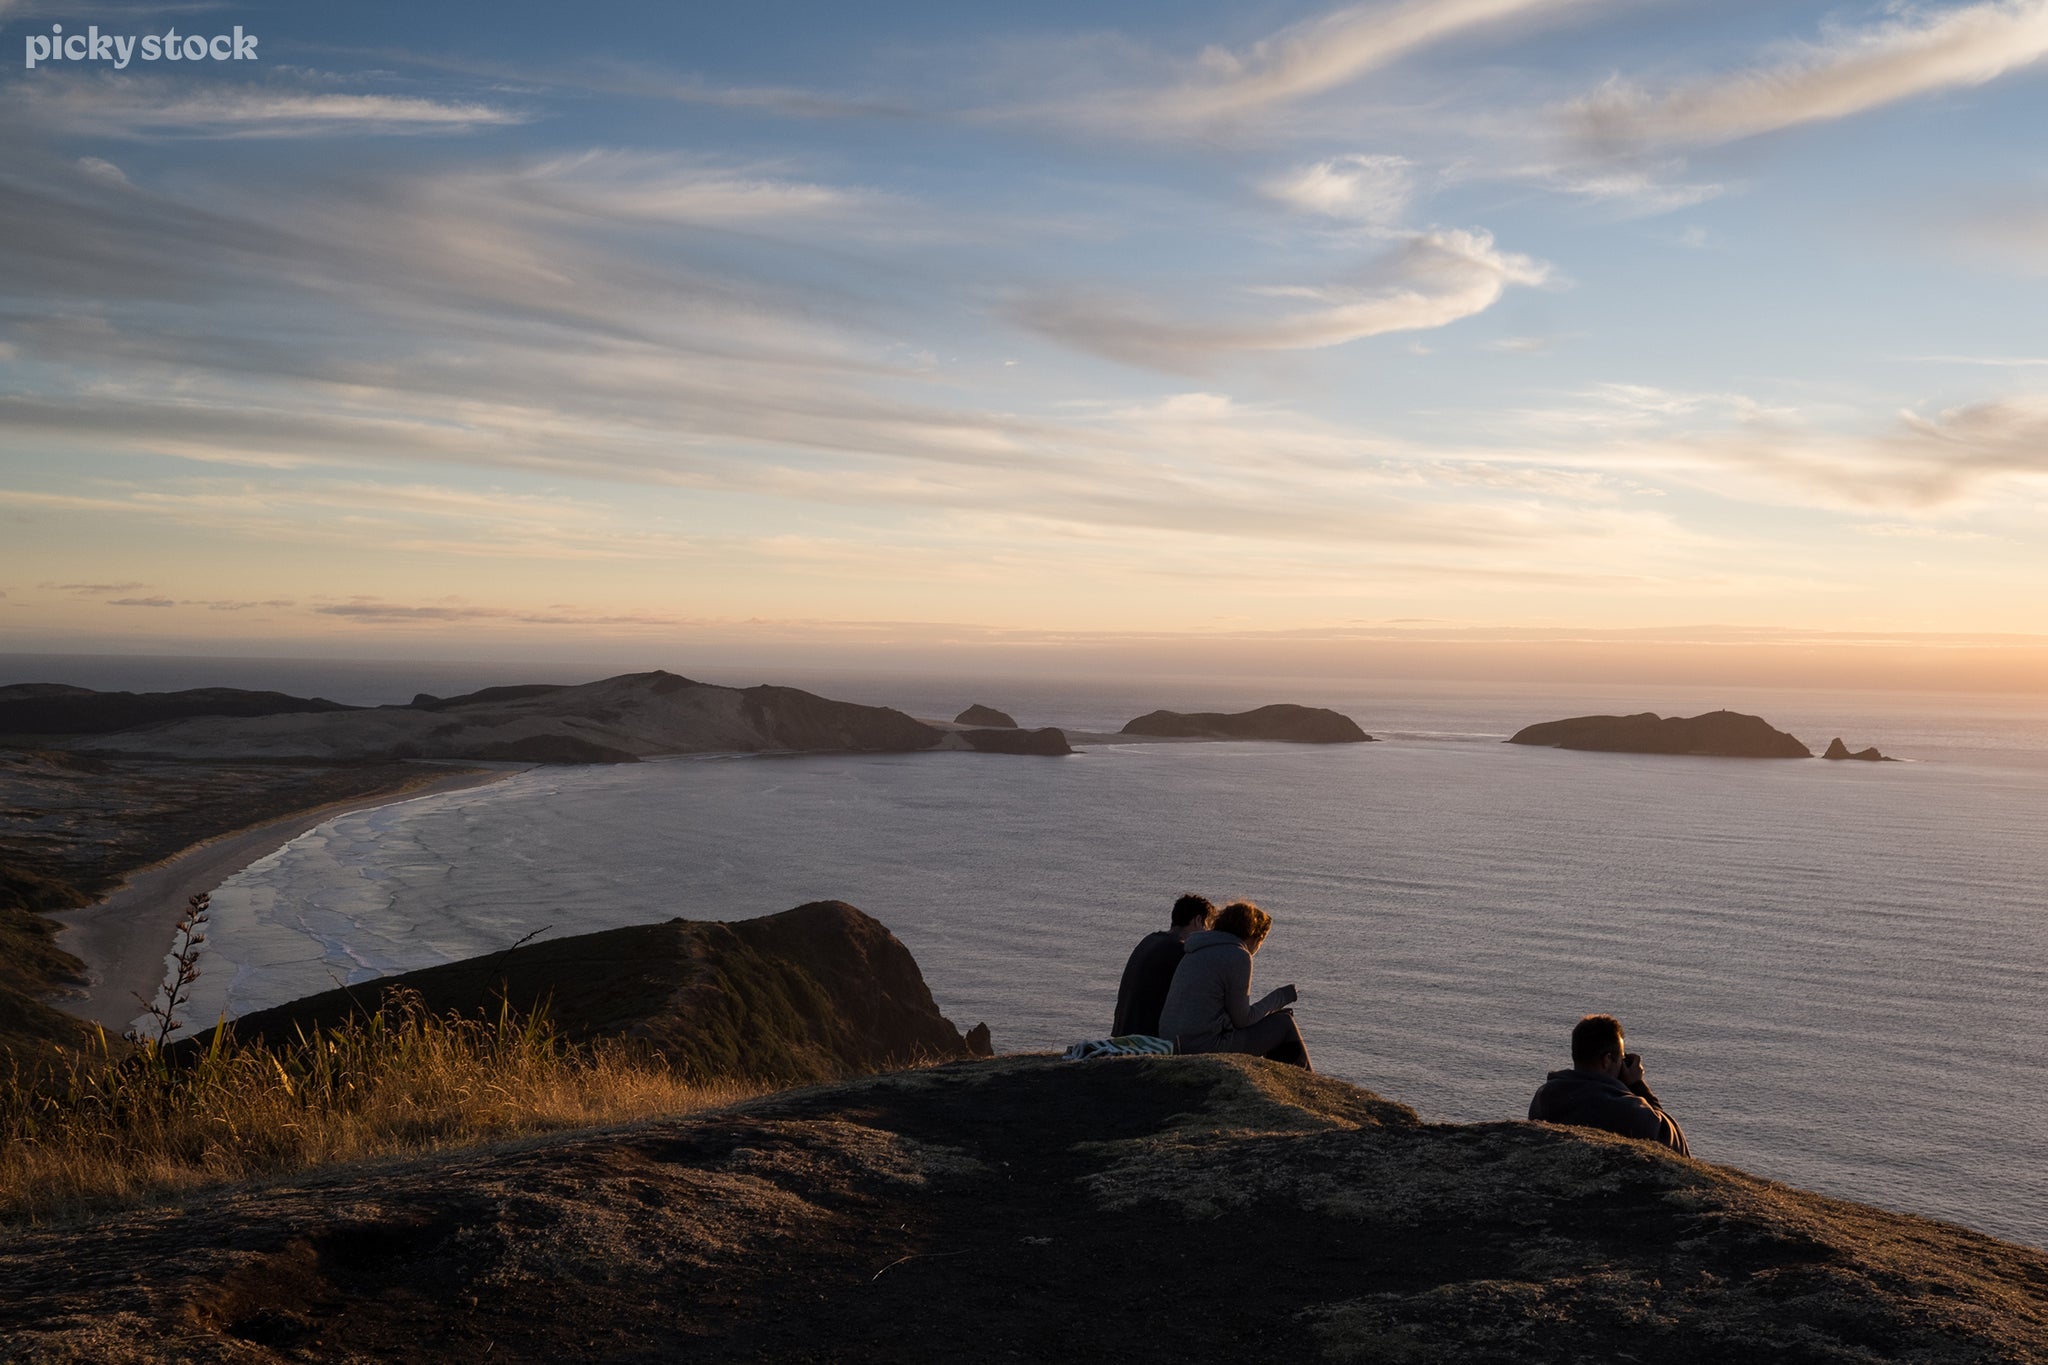 A landscape of three people sitting atop a tall grassy hill overlooking a beach and bay of water, the sun blurring the nimbus clouds into a hazy wall of light on the horizon.